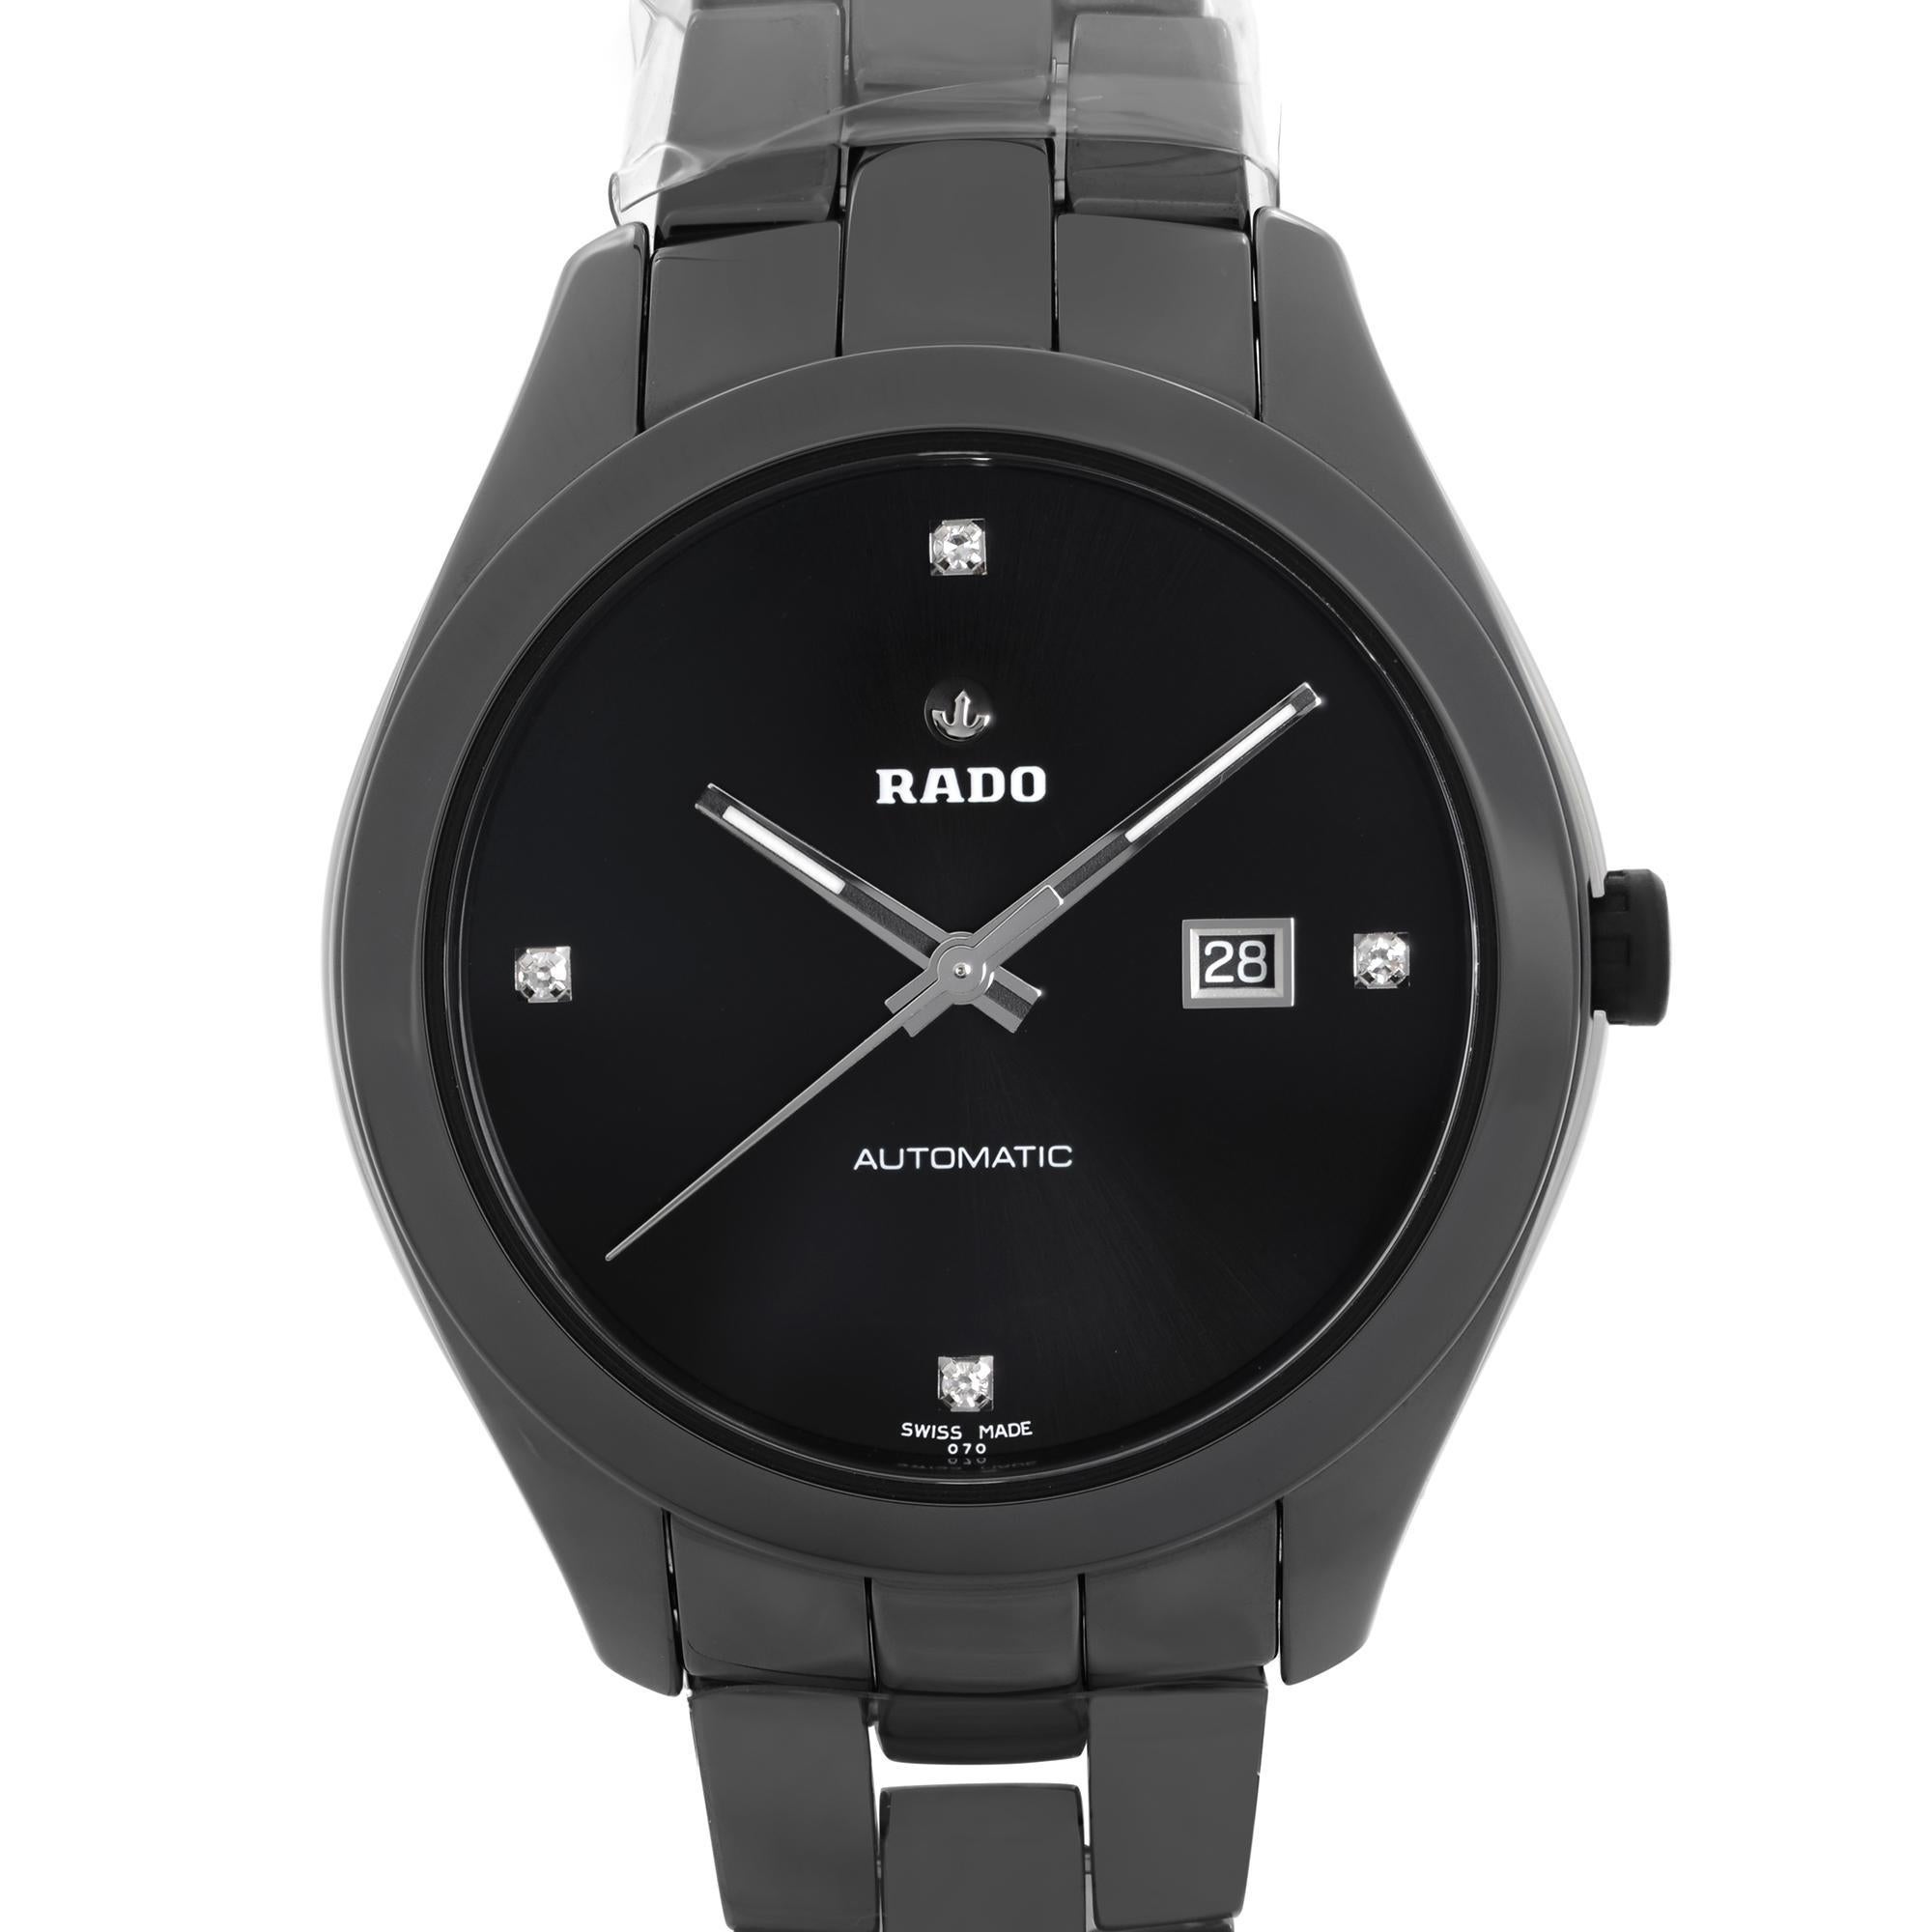 Unworn Rado Hyperchrome Ceramic Black Diamond Dial Automatic Ladies Watch R32260702. This is a beautiful timepiece that is powered by a Mechanical (Automatic) Movement. Features: Black Ceramic Case and Bracelet, Fixed Black Ceramic Bezel, Black Dial